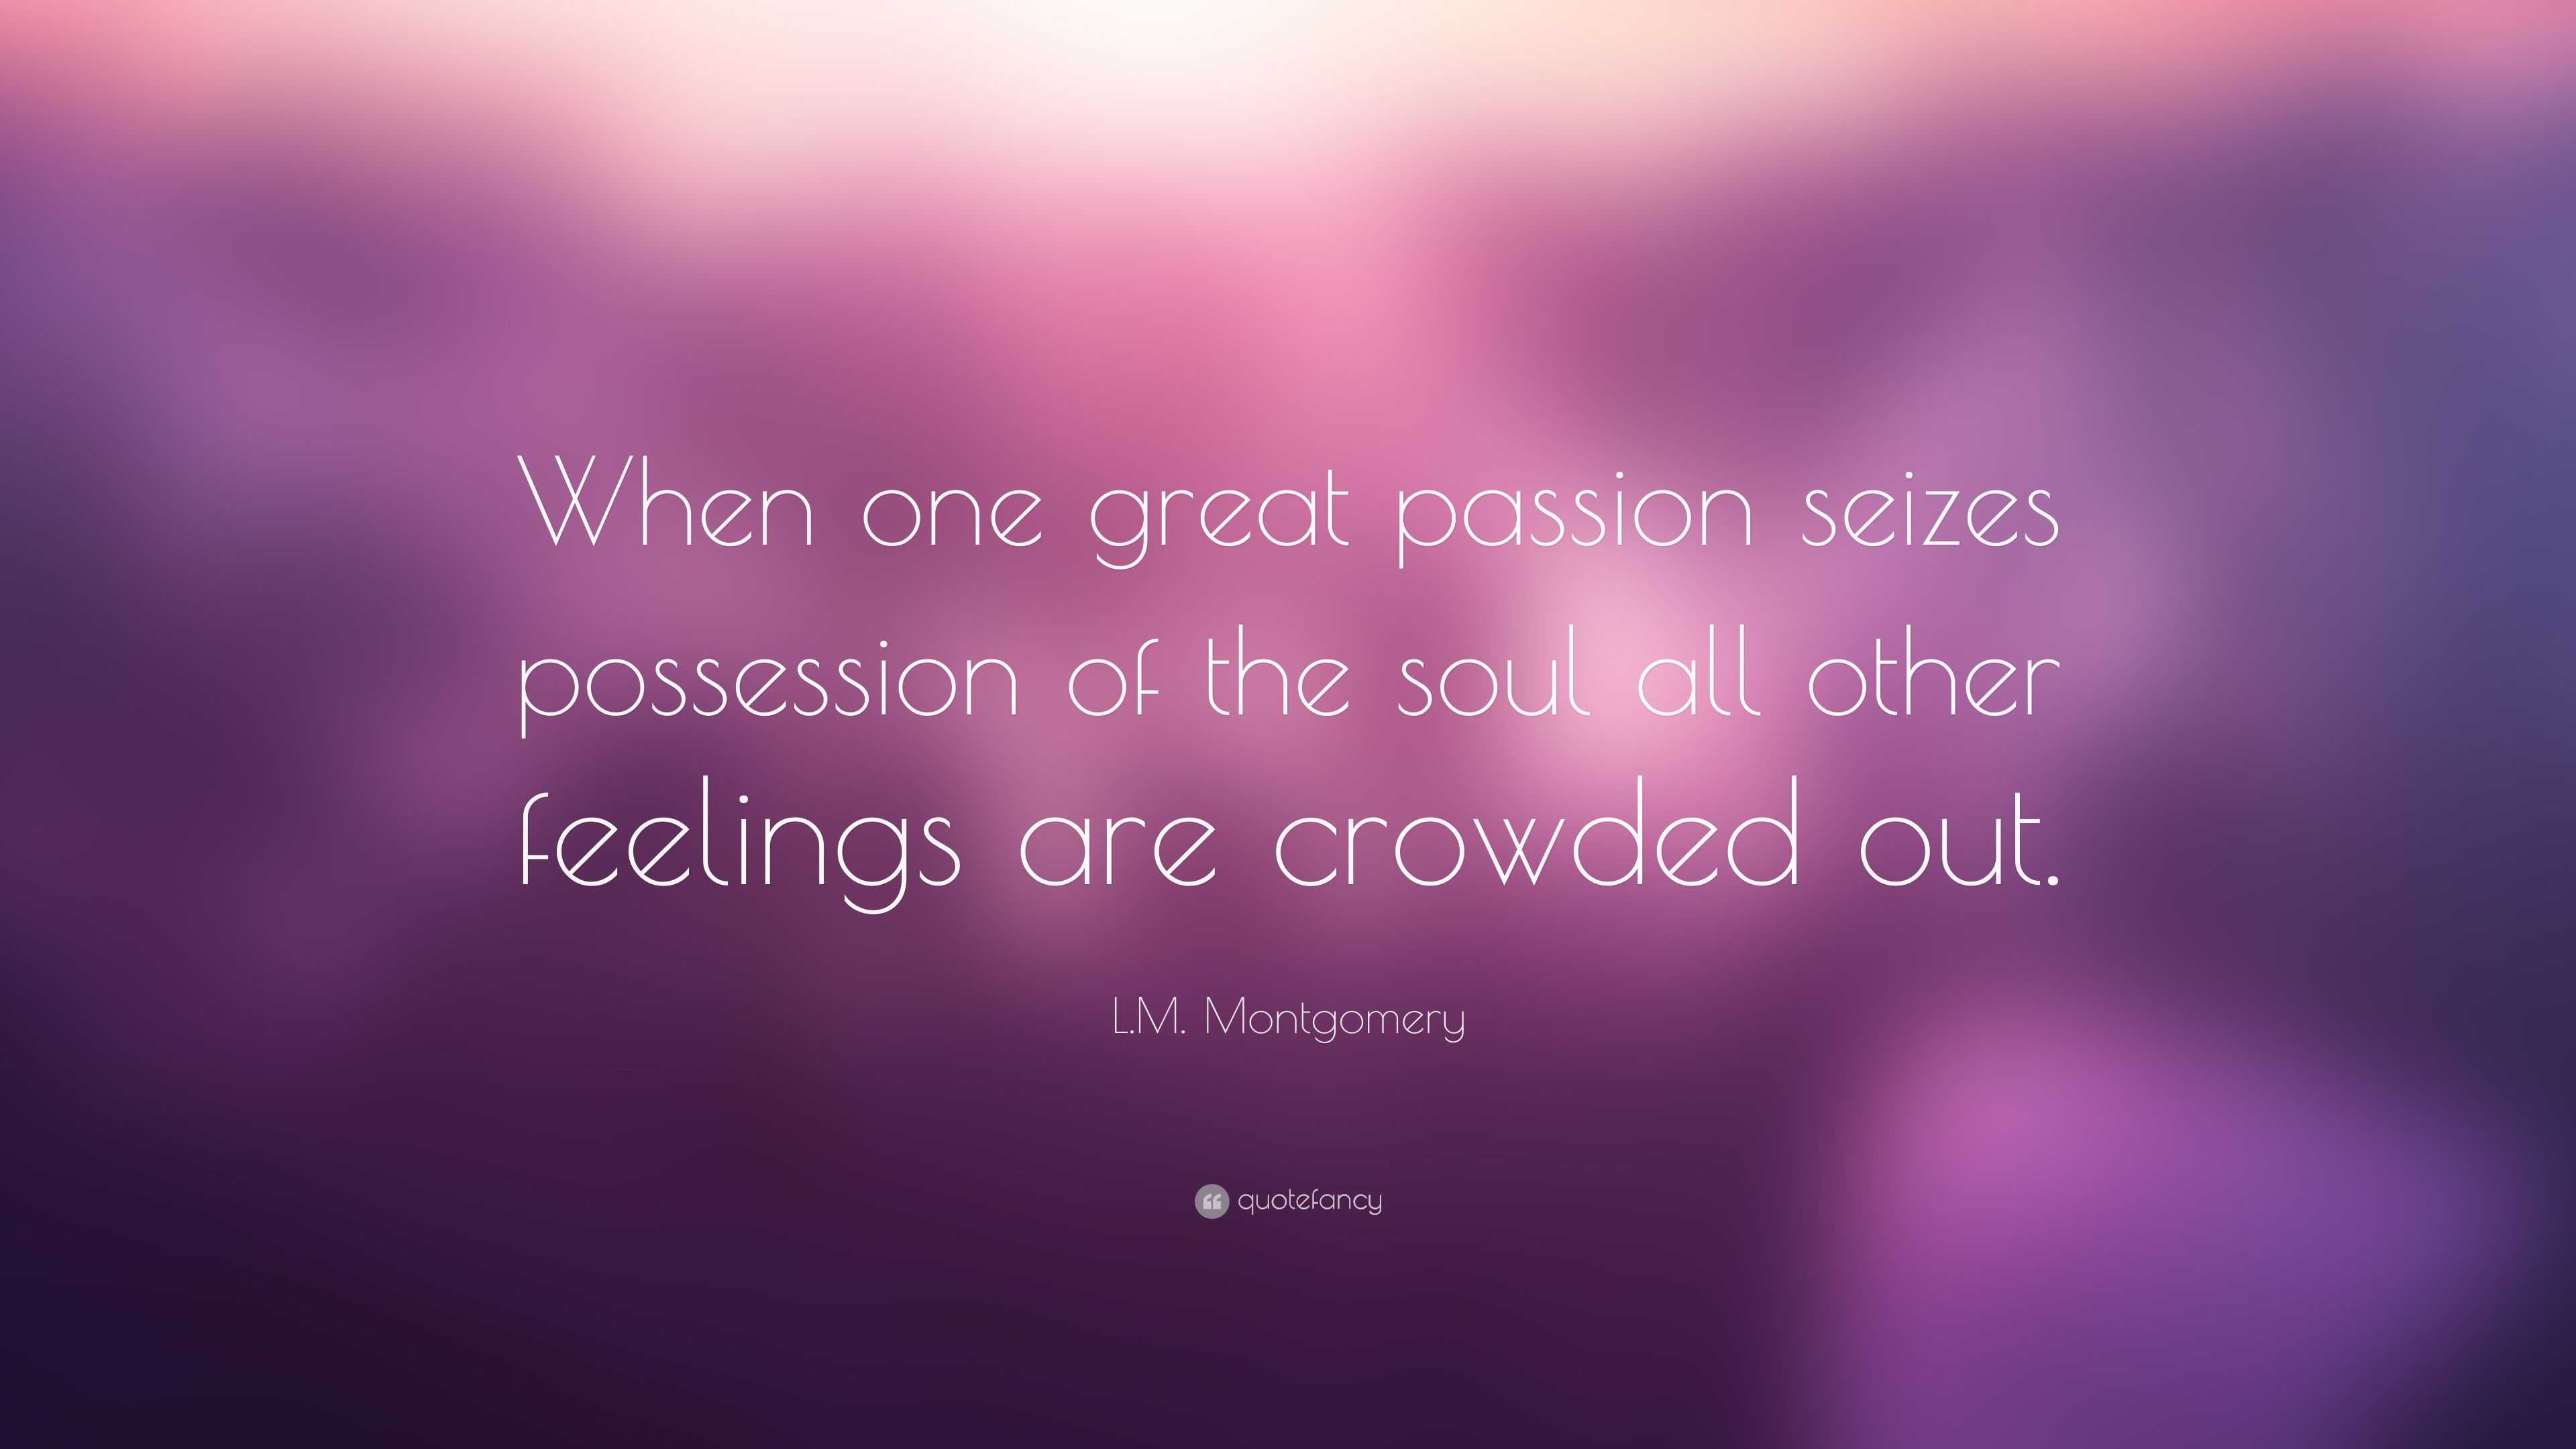 L.M. Montgomery Quote: “When one great passion seizes possession of the ...